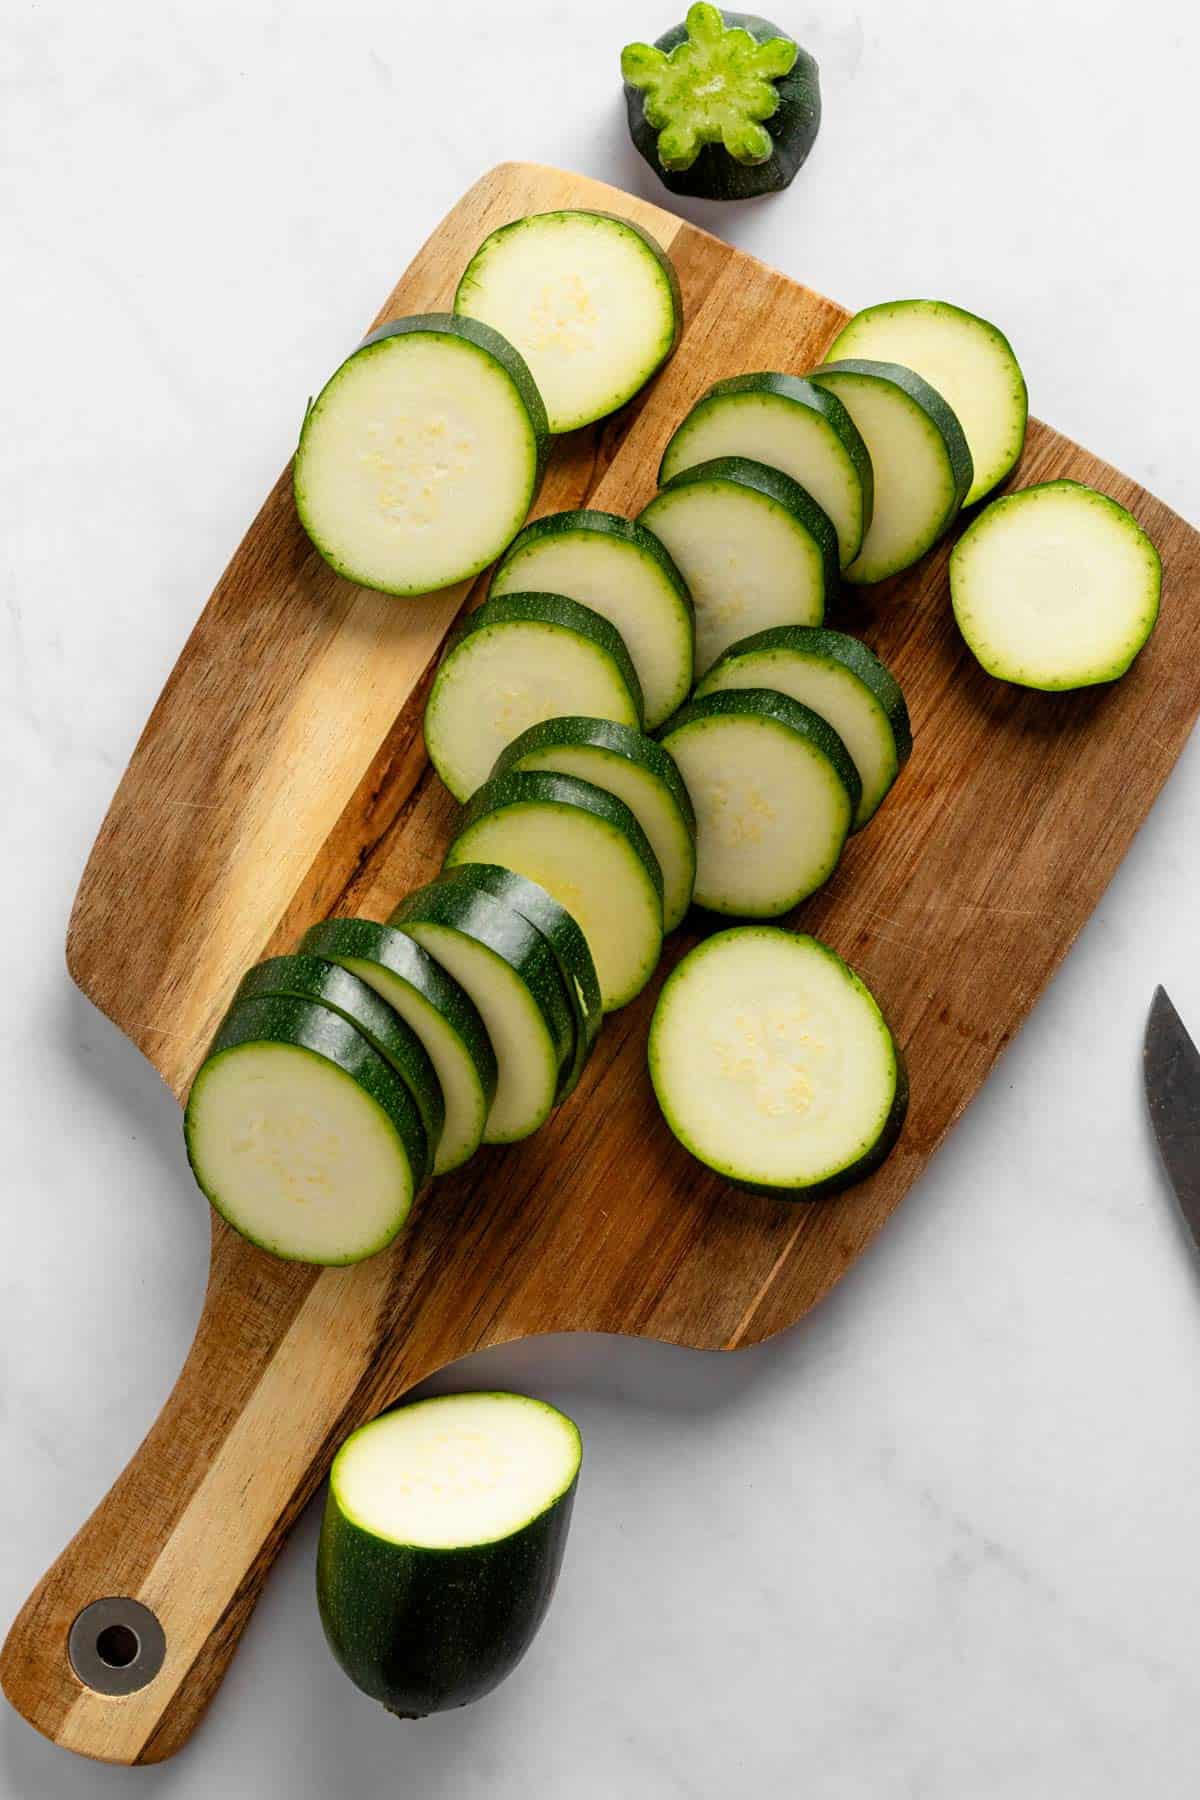 cutting zucchini into slices on wooden board.